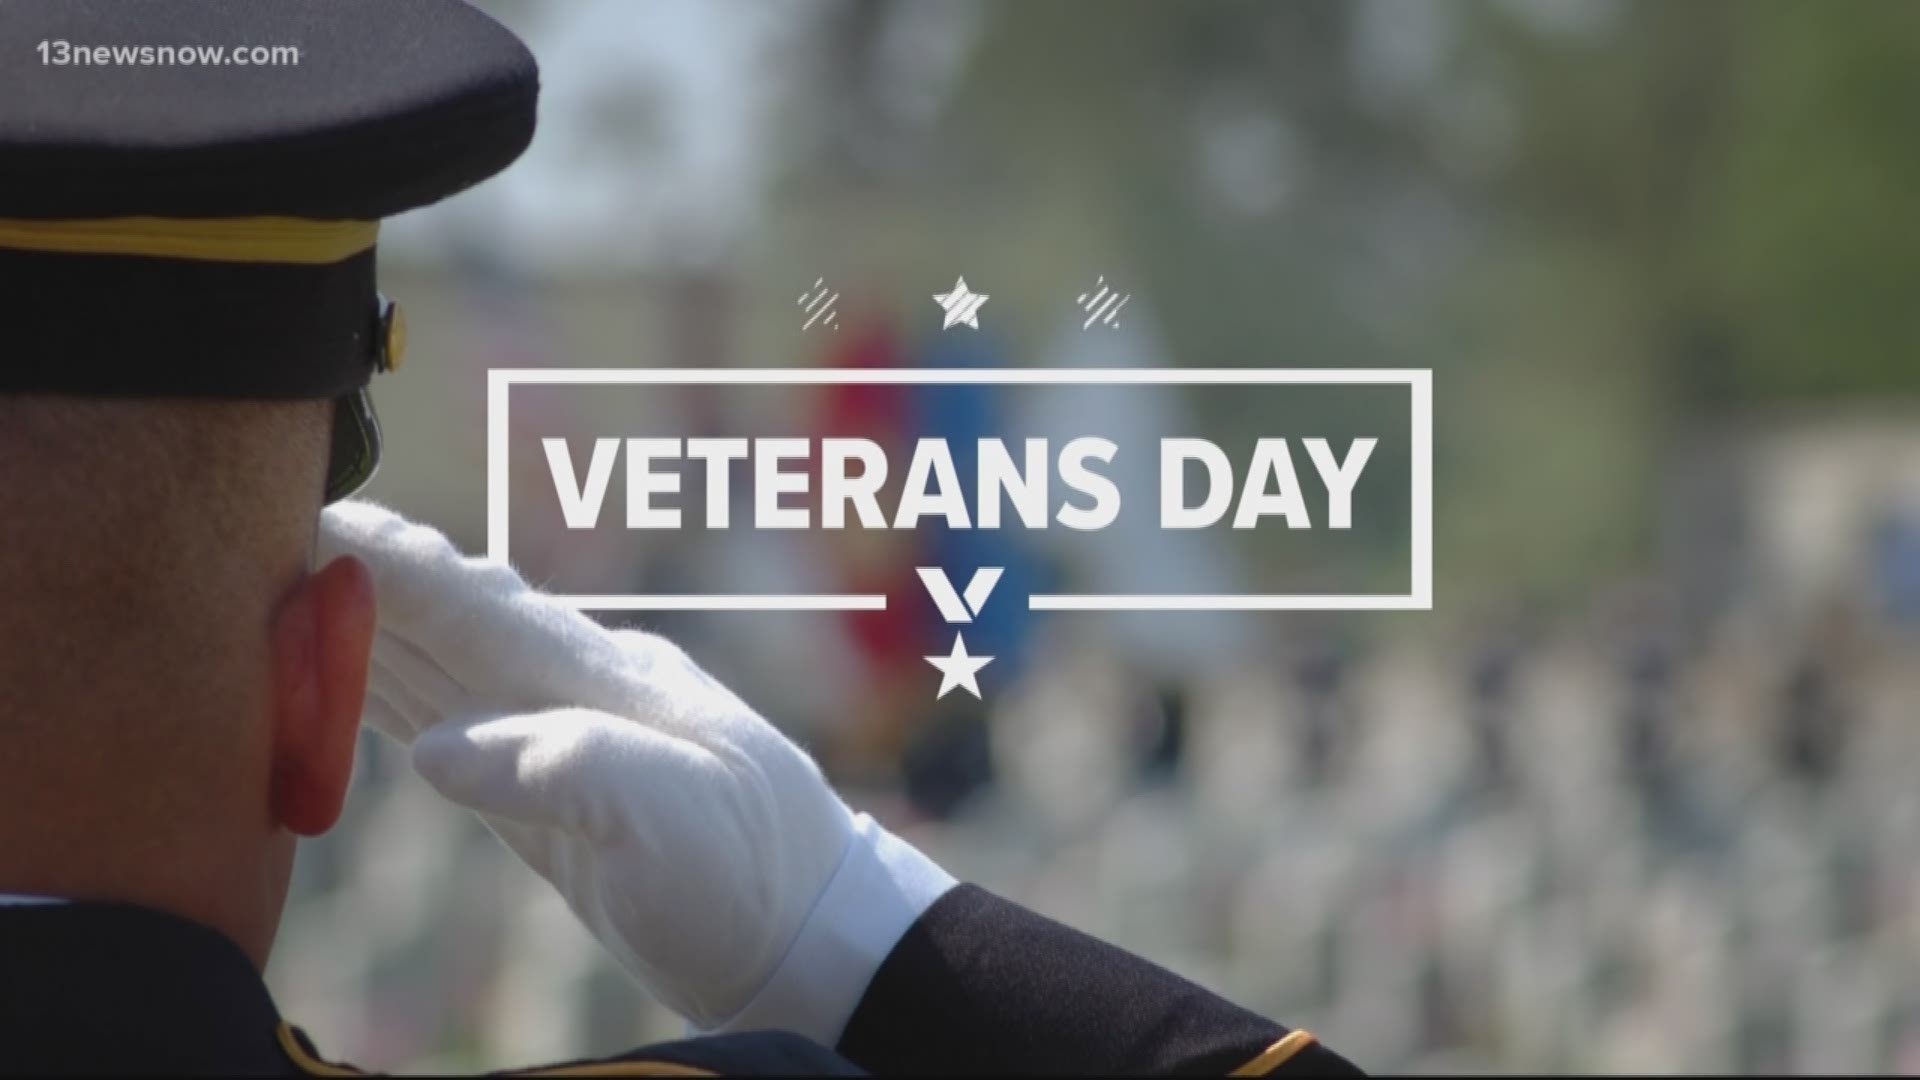 Today we honor veterans all around the country. Here are events happening in Hampton Roads, and also where you can get discounts and freebies on November 11.